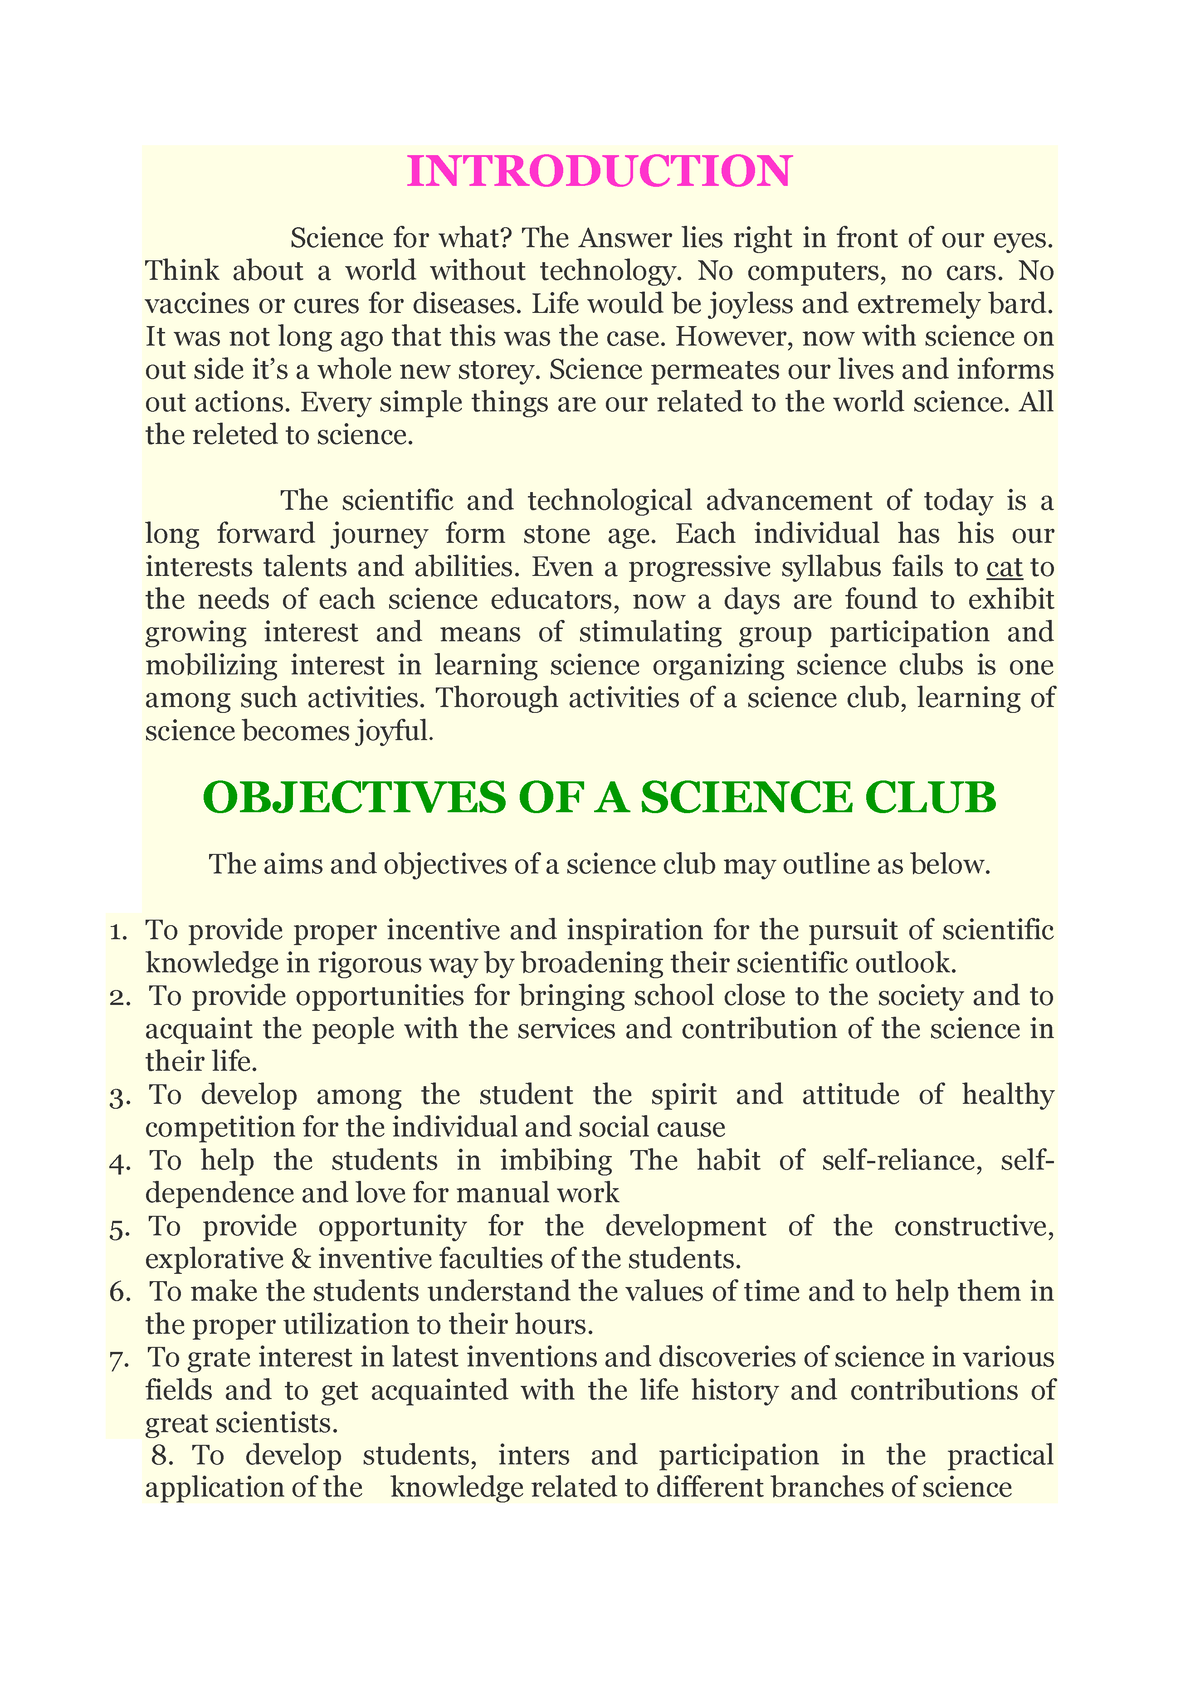 essay about science clubbing